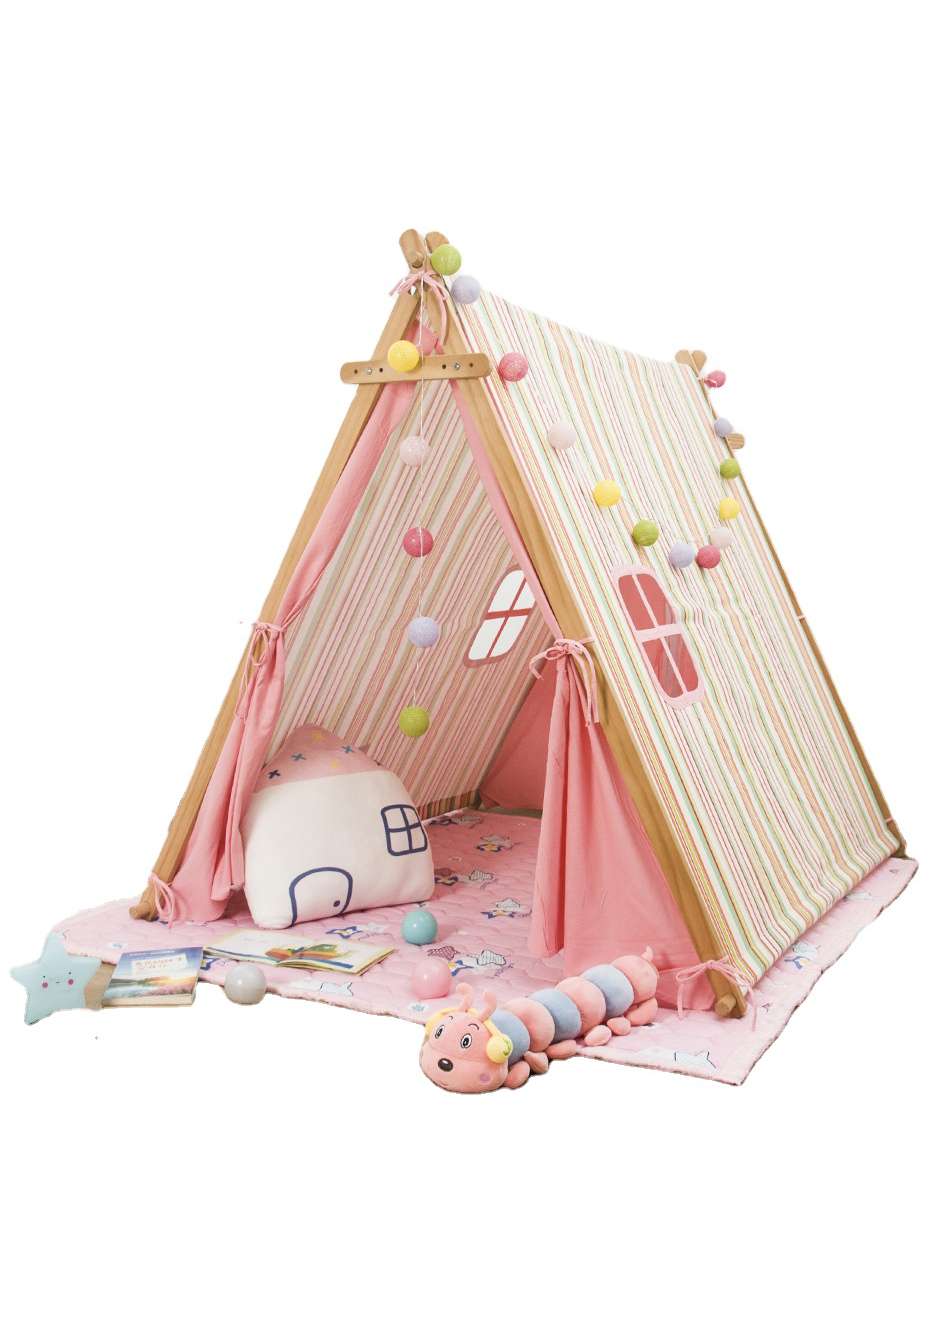 Lovetree Factory Hot Sale Play house Indoor Girl Polyester Camping Kids Tents For Sale Tent Kids